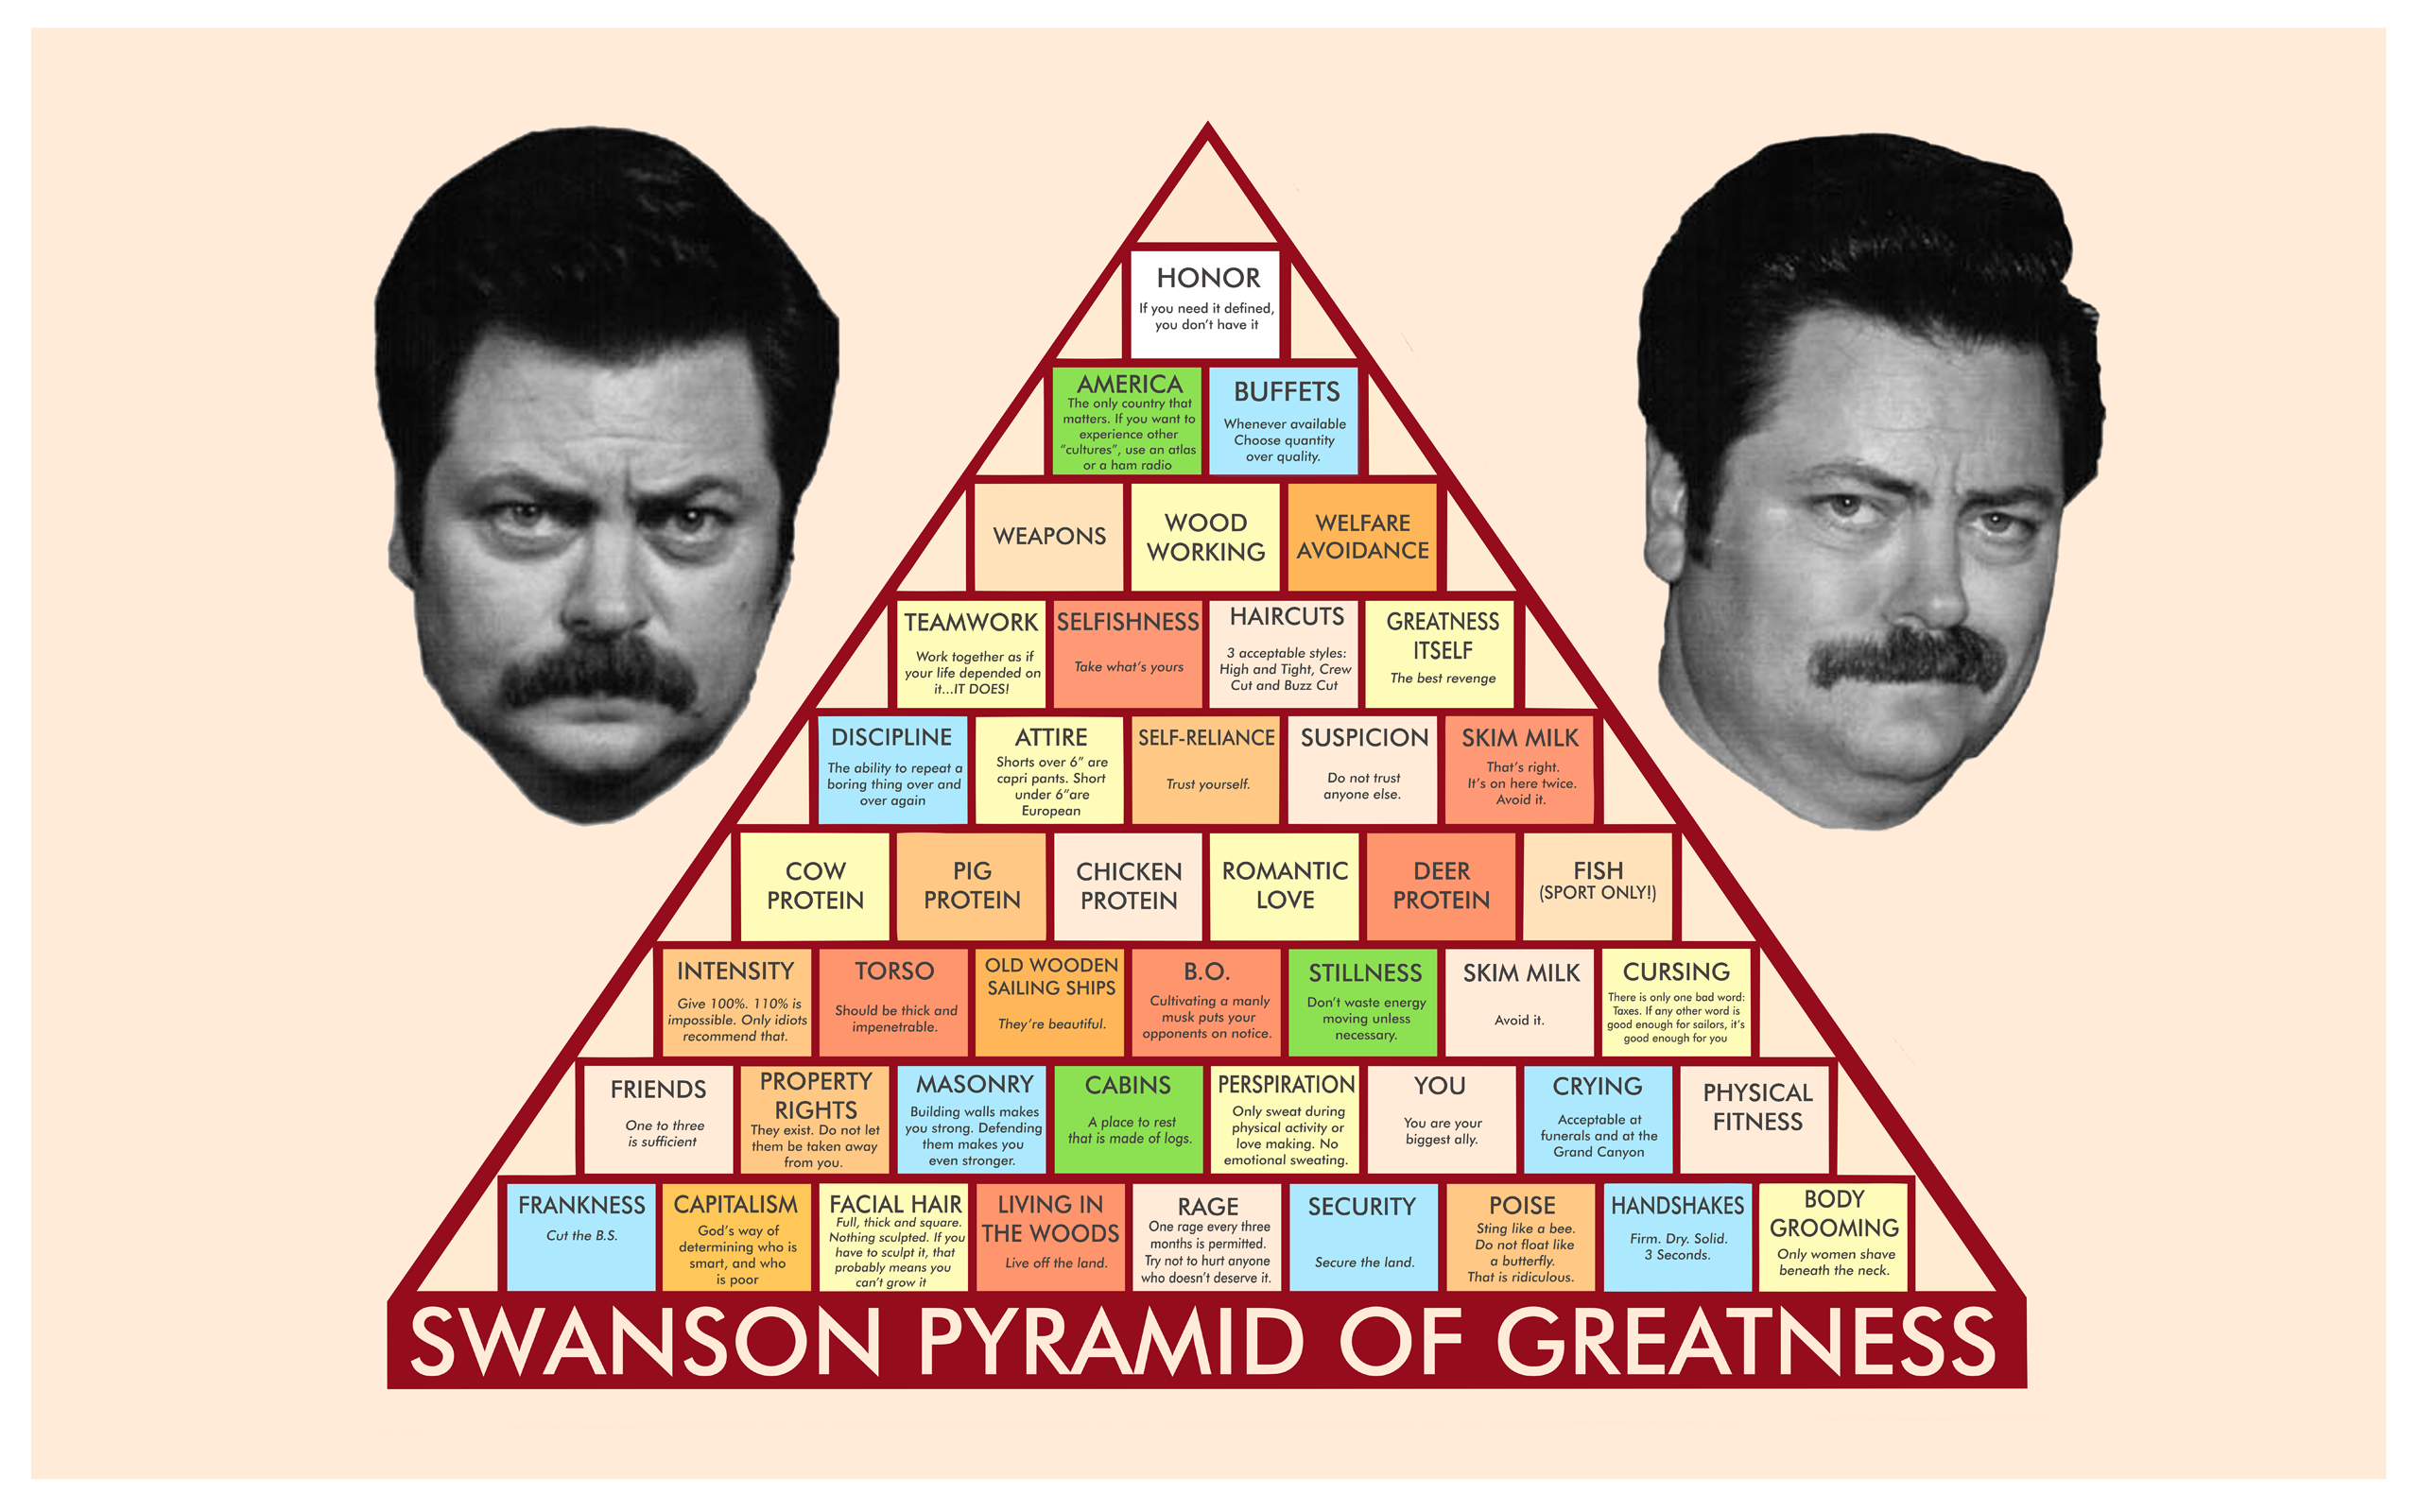 swanson-pyramid-of-greatness-he-man-womun-haters